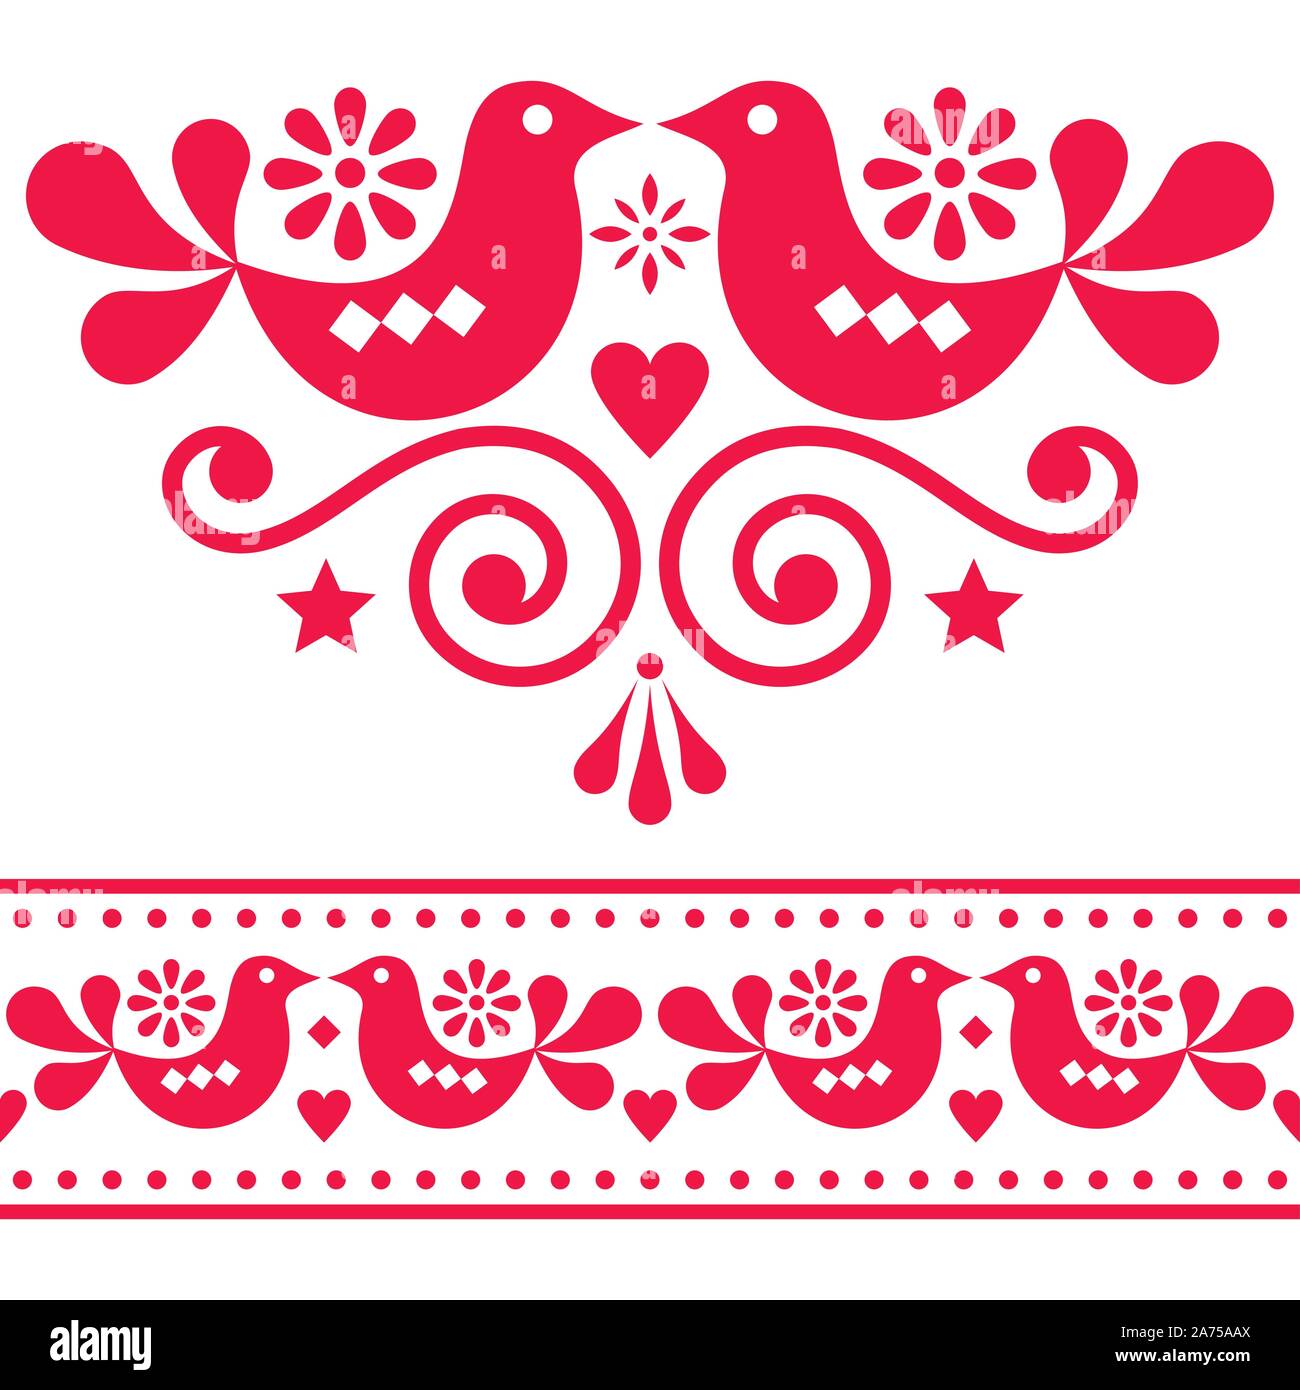 Scandinavian folk vector design elements, cute floral design with birds in red on white background Stock Vector